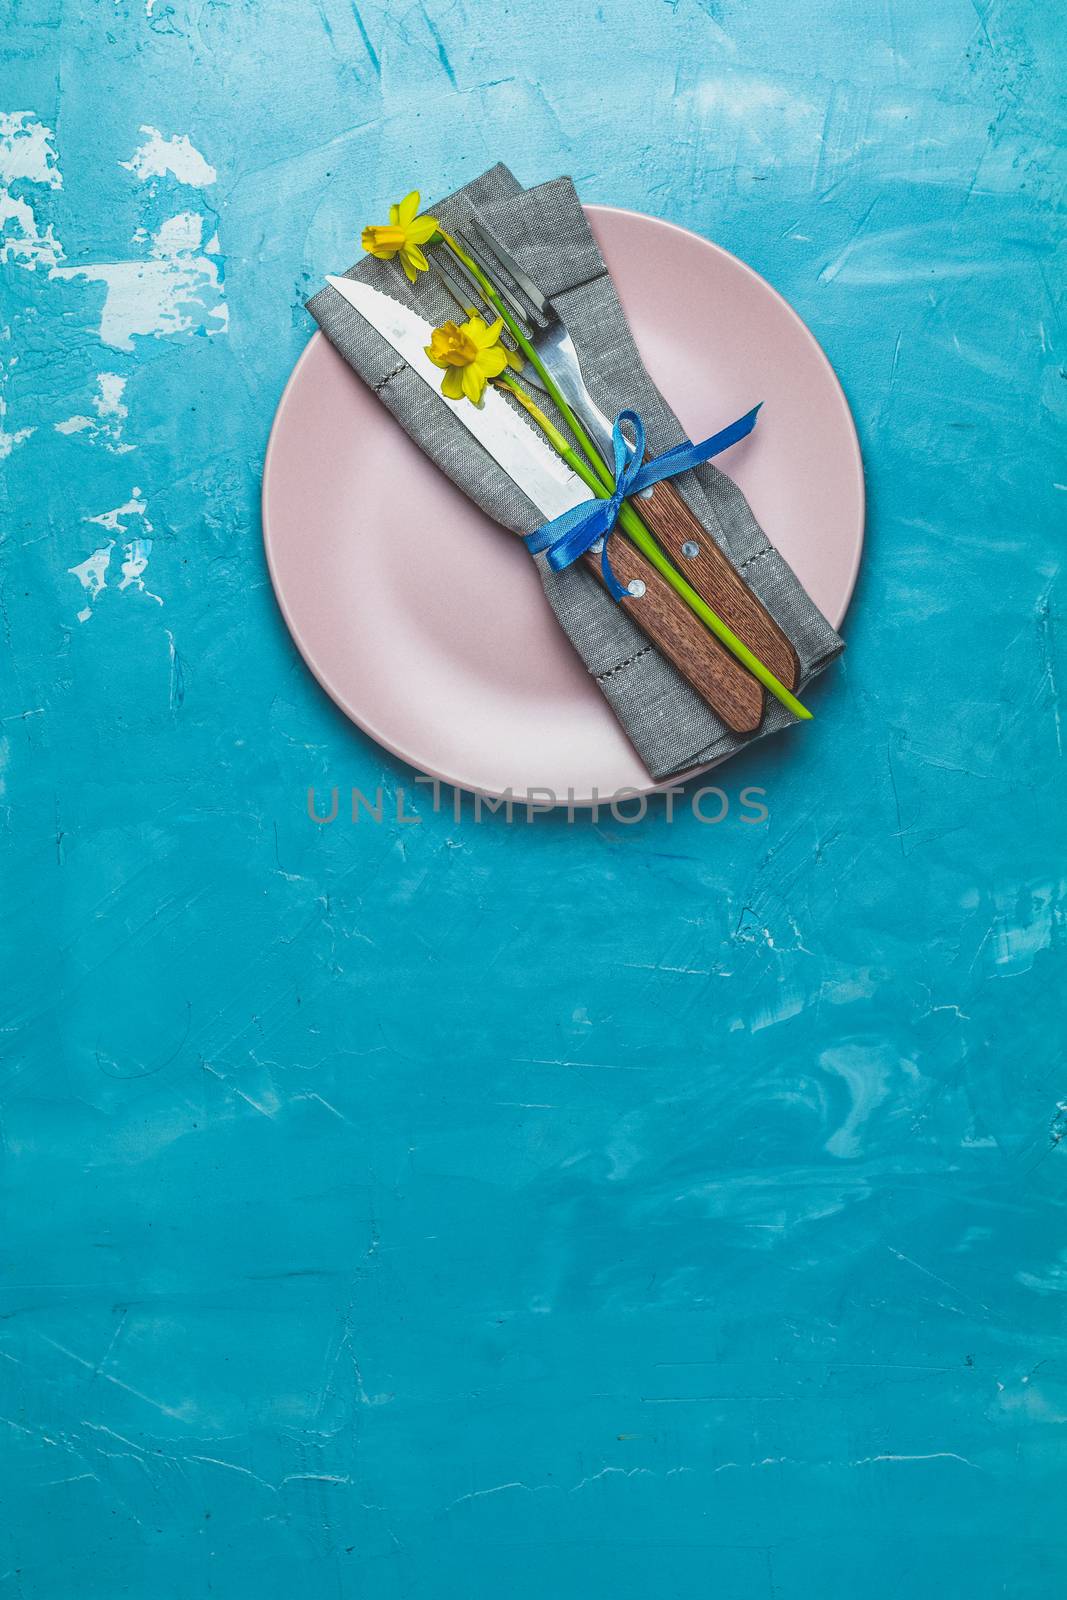 Empty pink plate and cutlery with daffodils on a napkin. Top view, green concrete surface background, copy space for you text